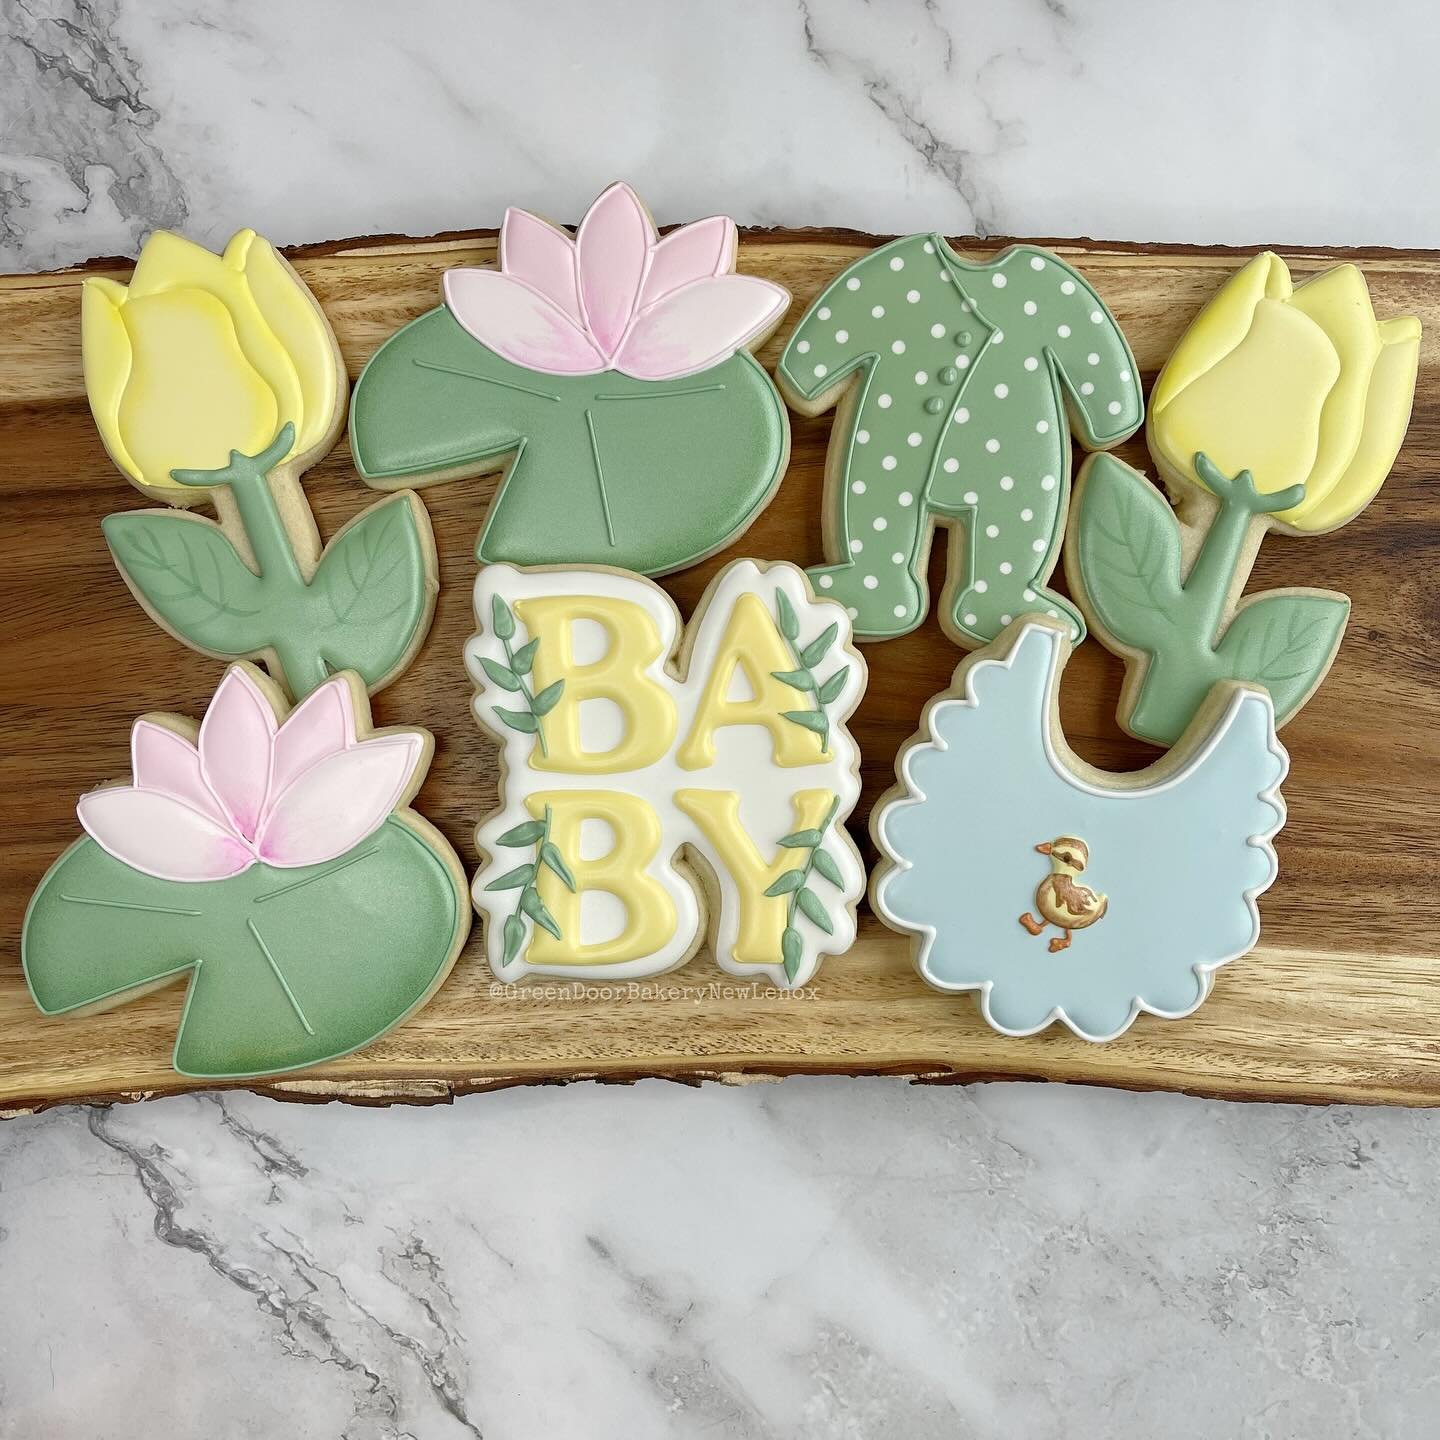 Spring cookies for a spring shower! I love these so much. Congratulations to the parents to be! 🐥 🎉 

#Greendoorbakerynewlenox #newlenox #newlenoxil #newlenoxillinois #illinois #instacookies #customcookies #sugarcookies #homebaker #cookies #yum #ed